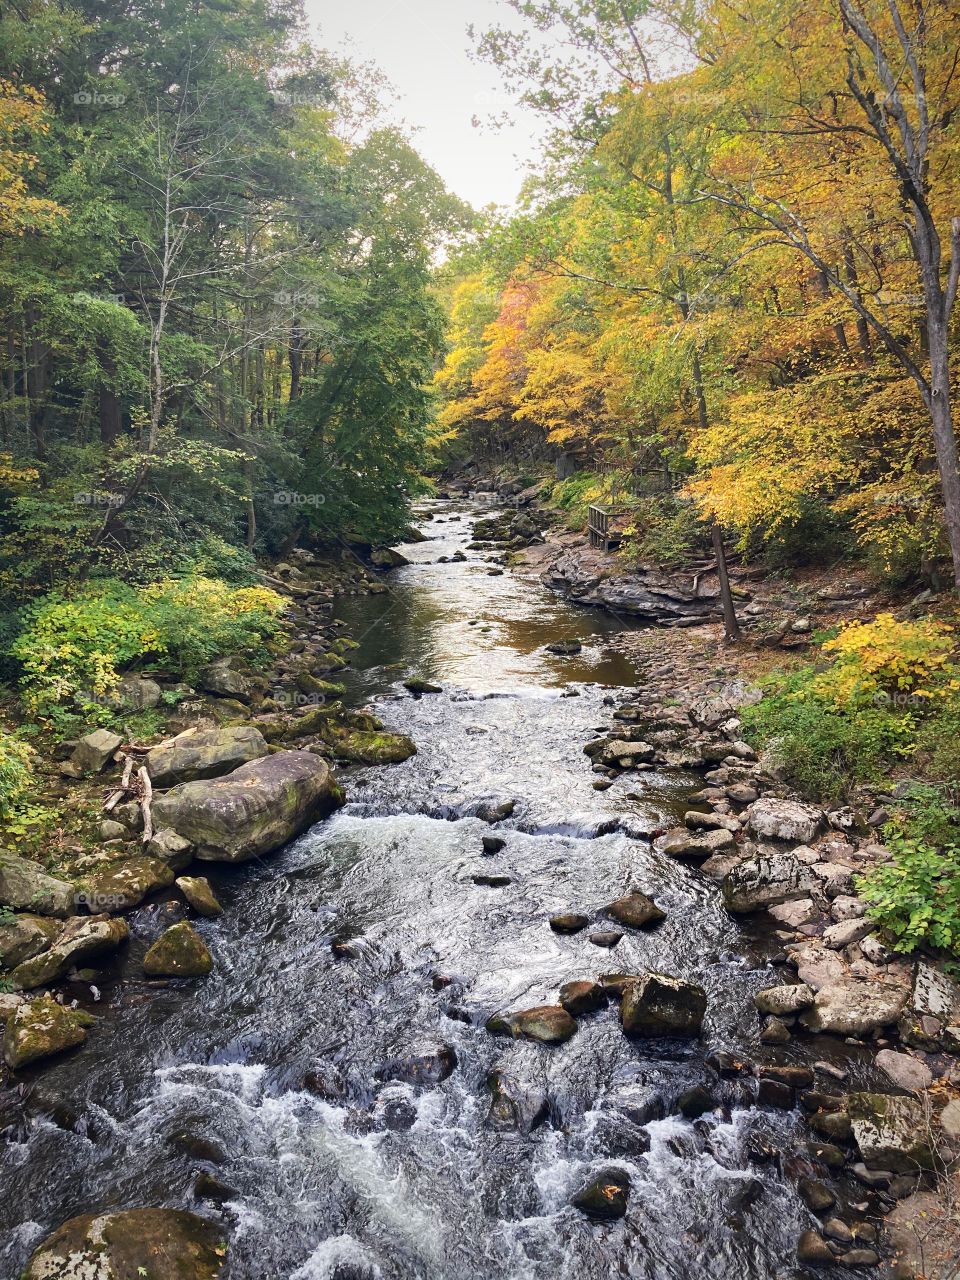 A beautiful river flows by as the leaves change their colors. Hello Fall! 